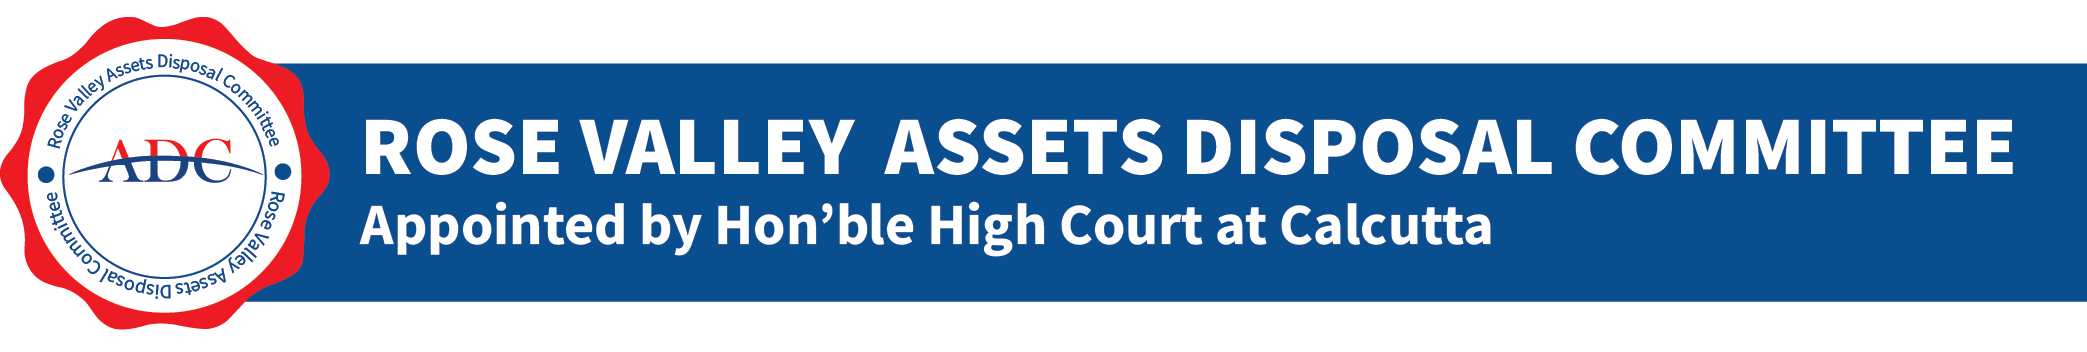 Rose Valley Assets Disposal Committee